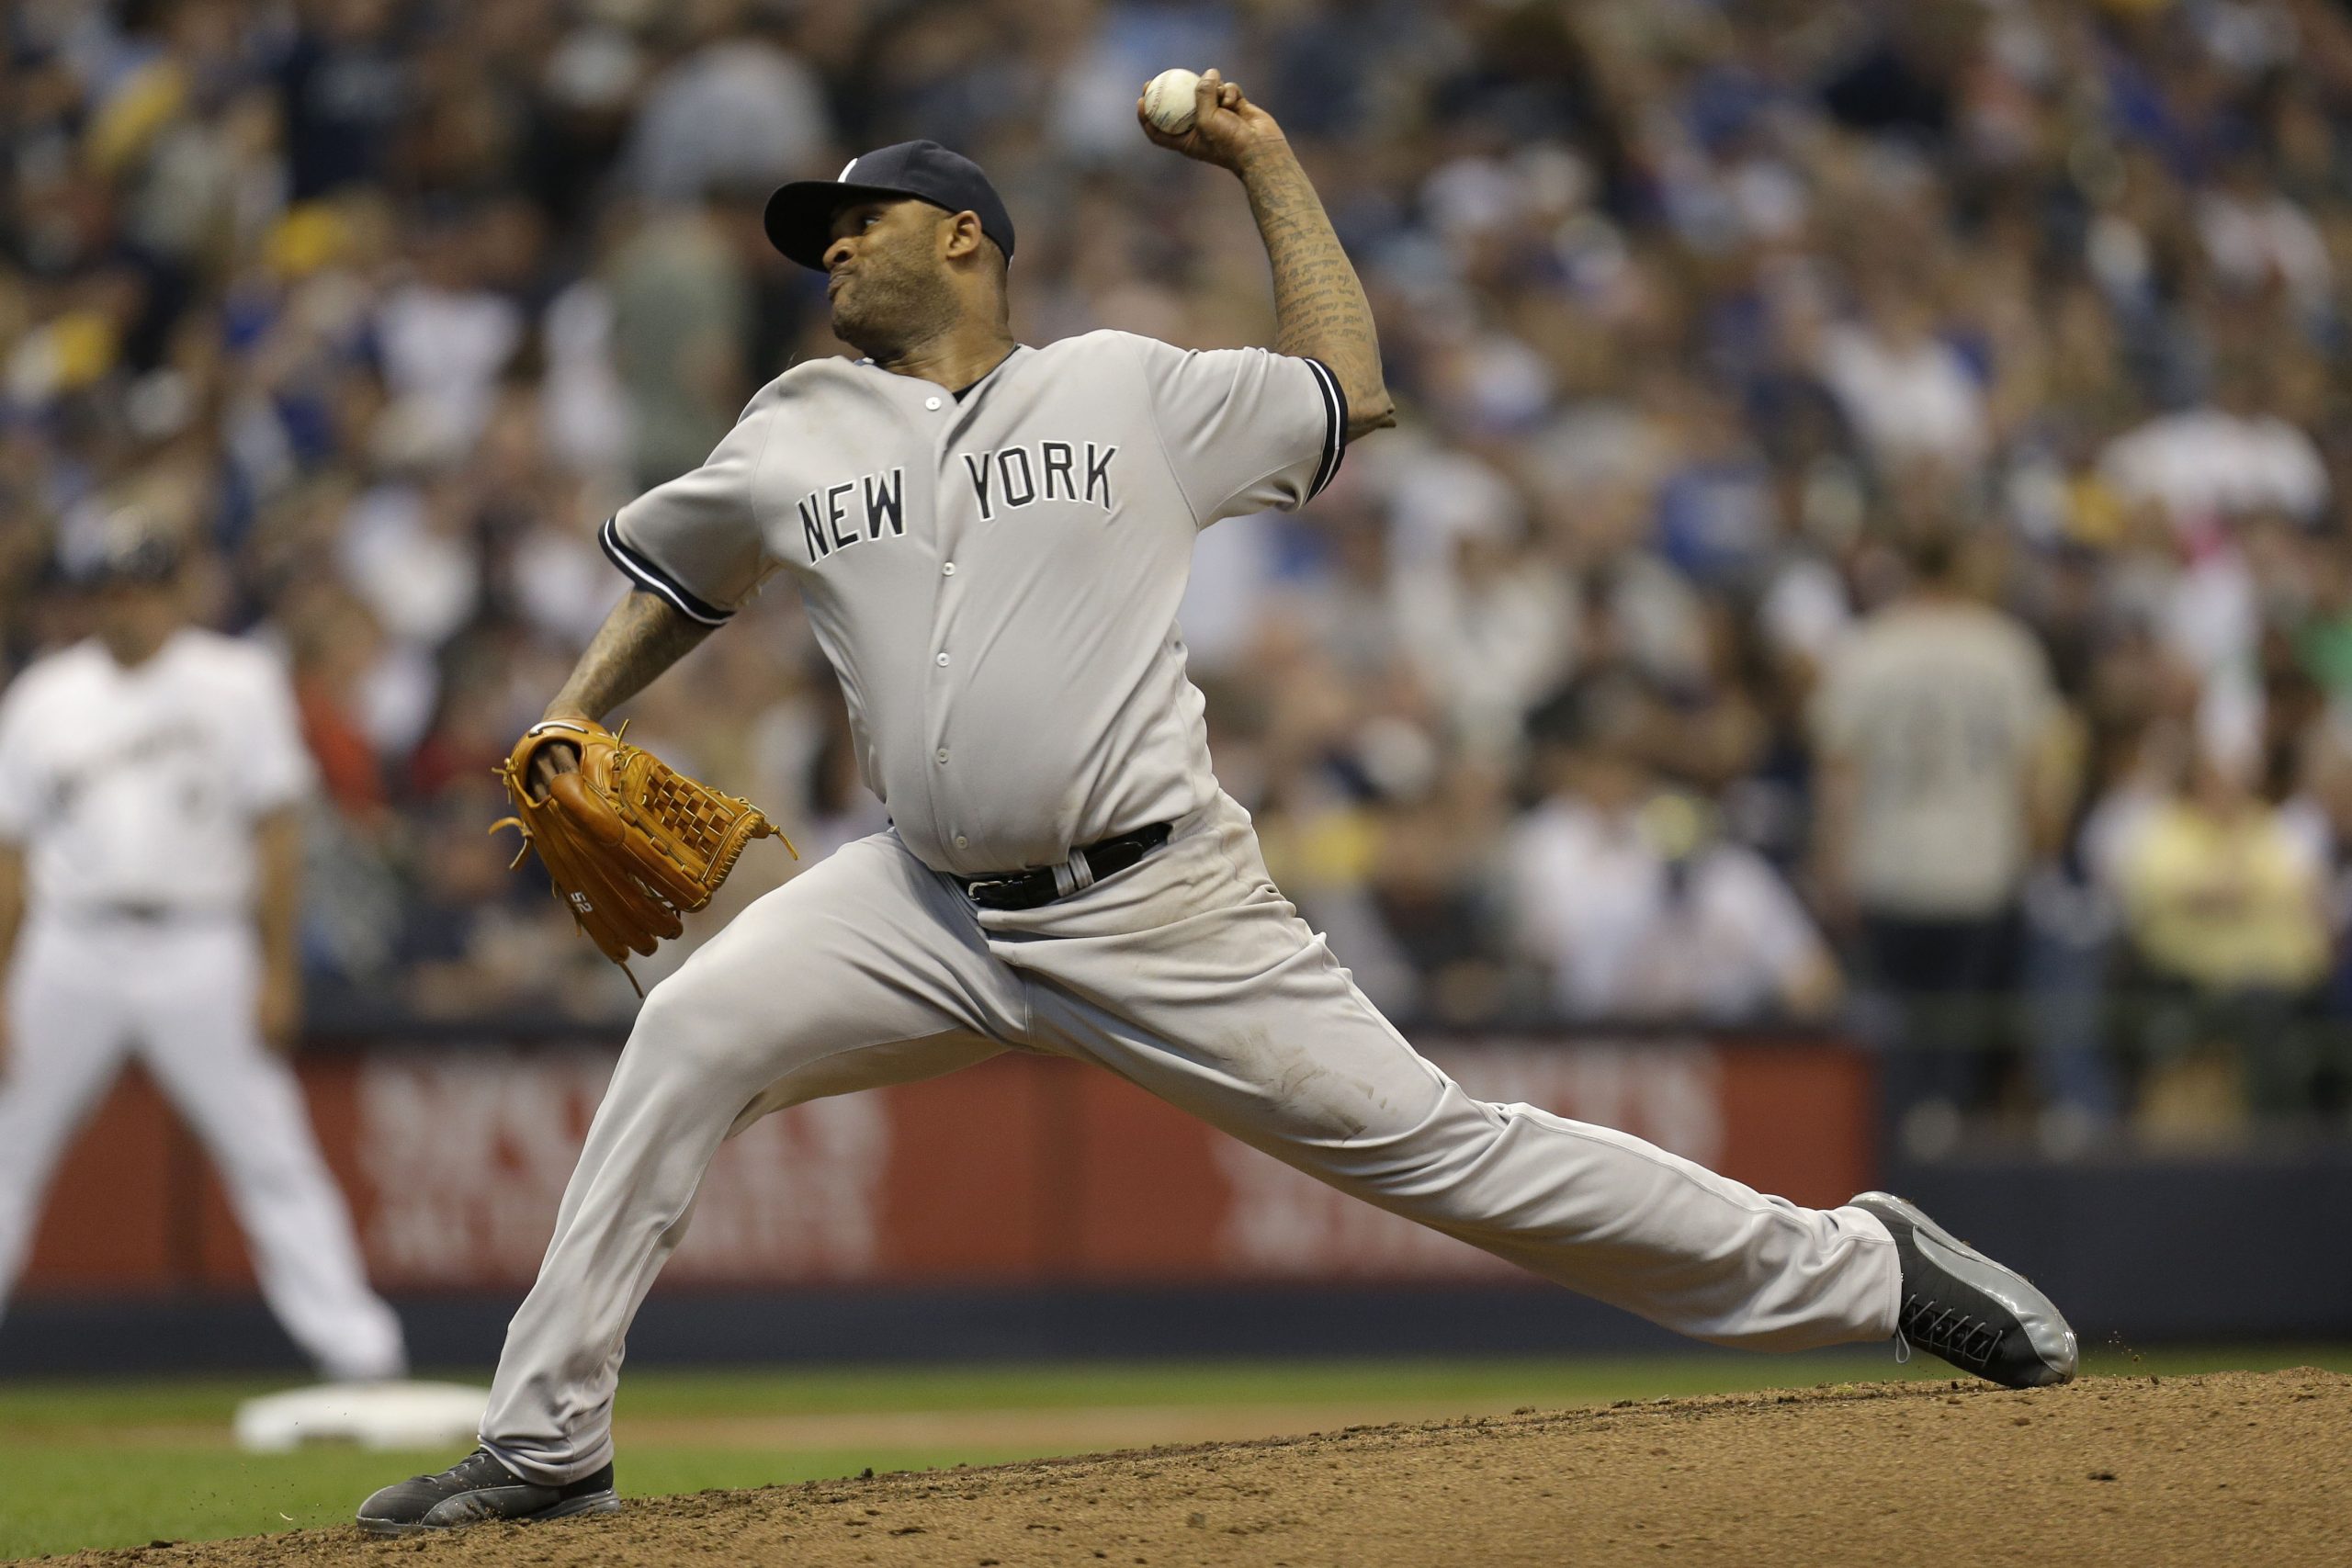 CC Sabathia of the New York Yankees pitches during the Interleague game against the Milwaukee Brewers.